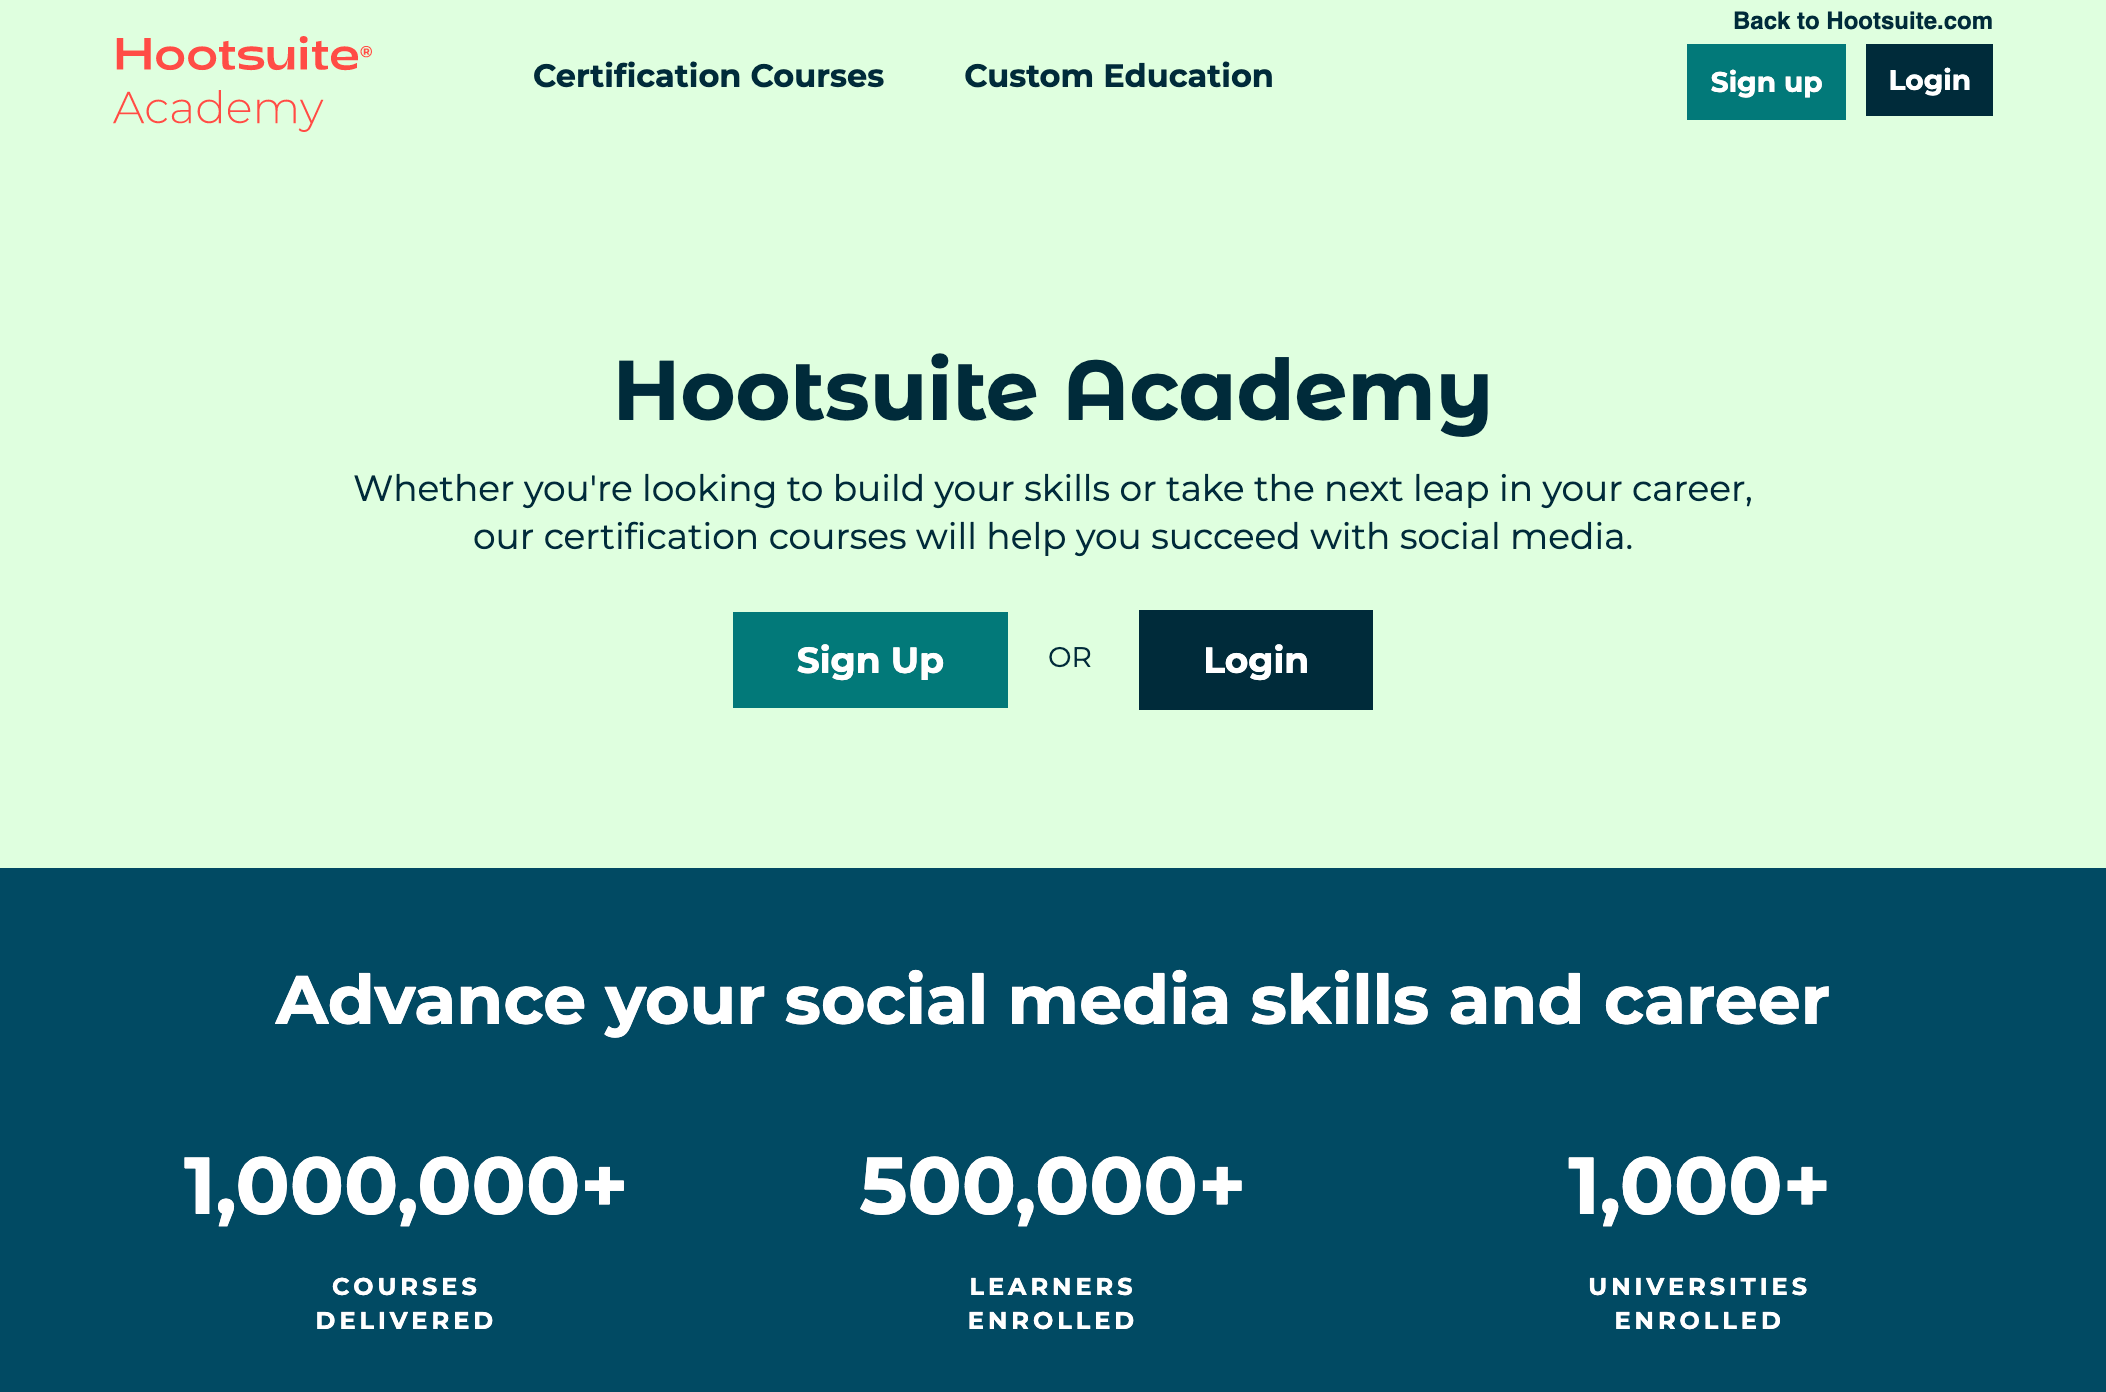 Sign up for Hootsuite Academy 